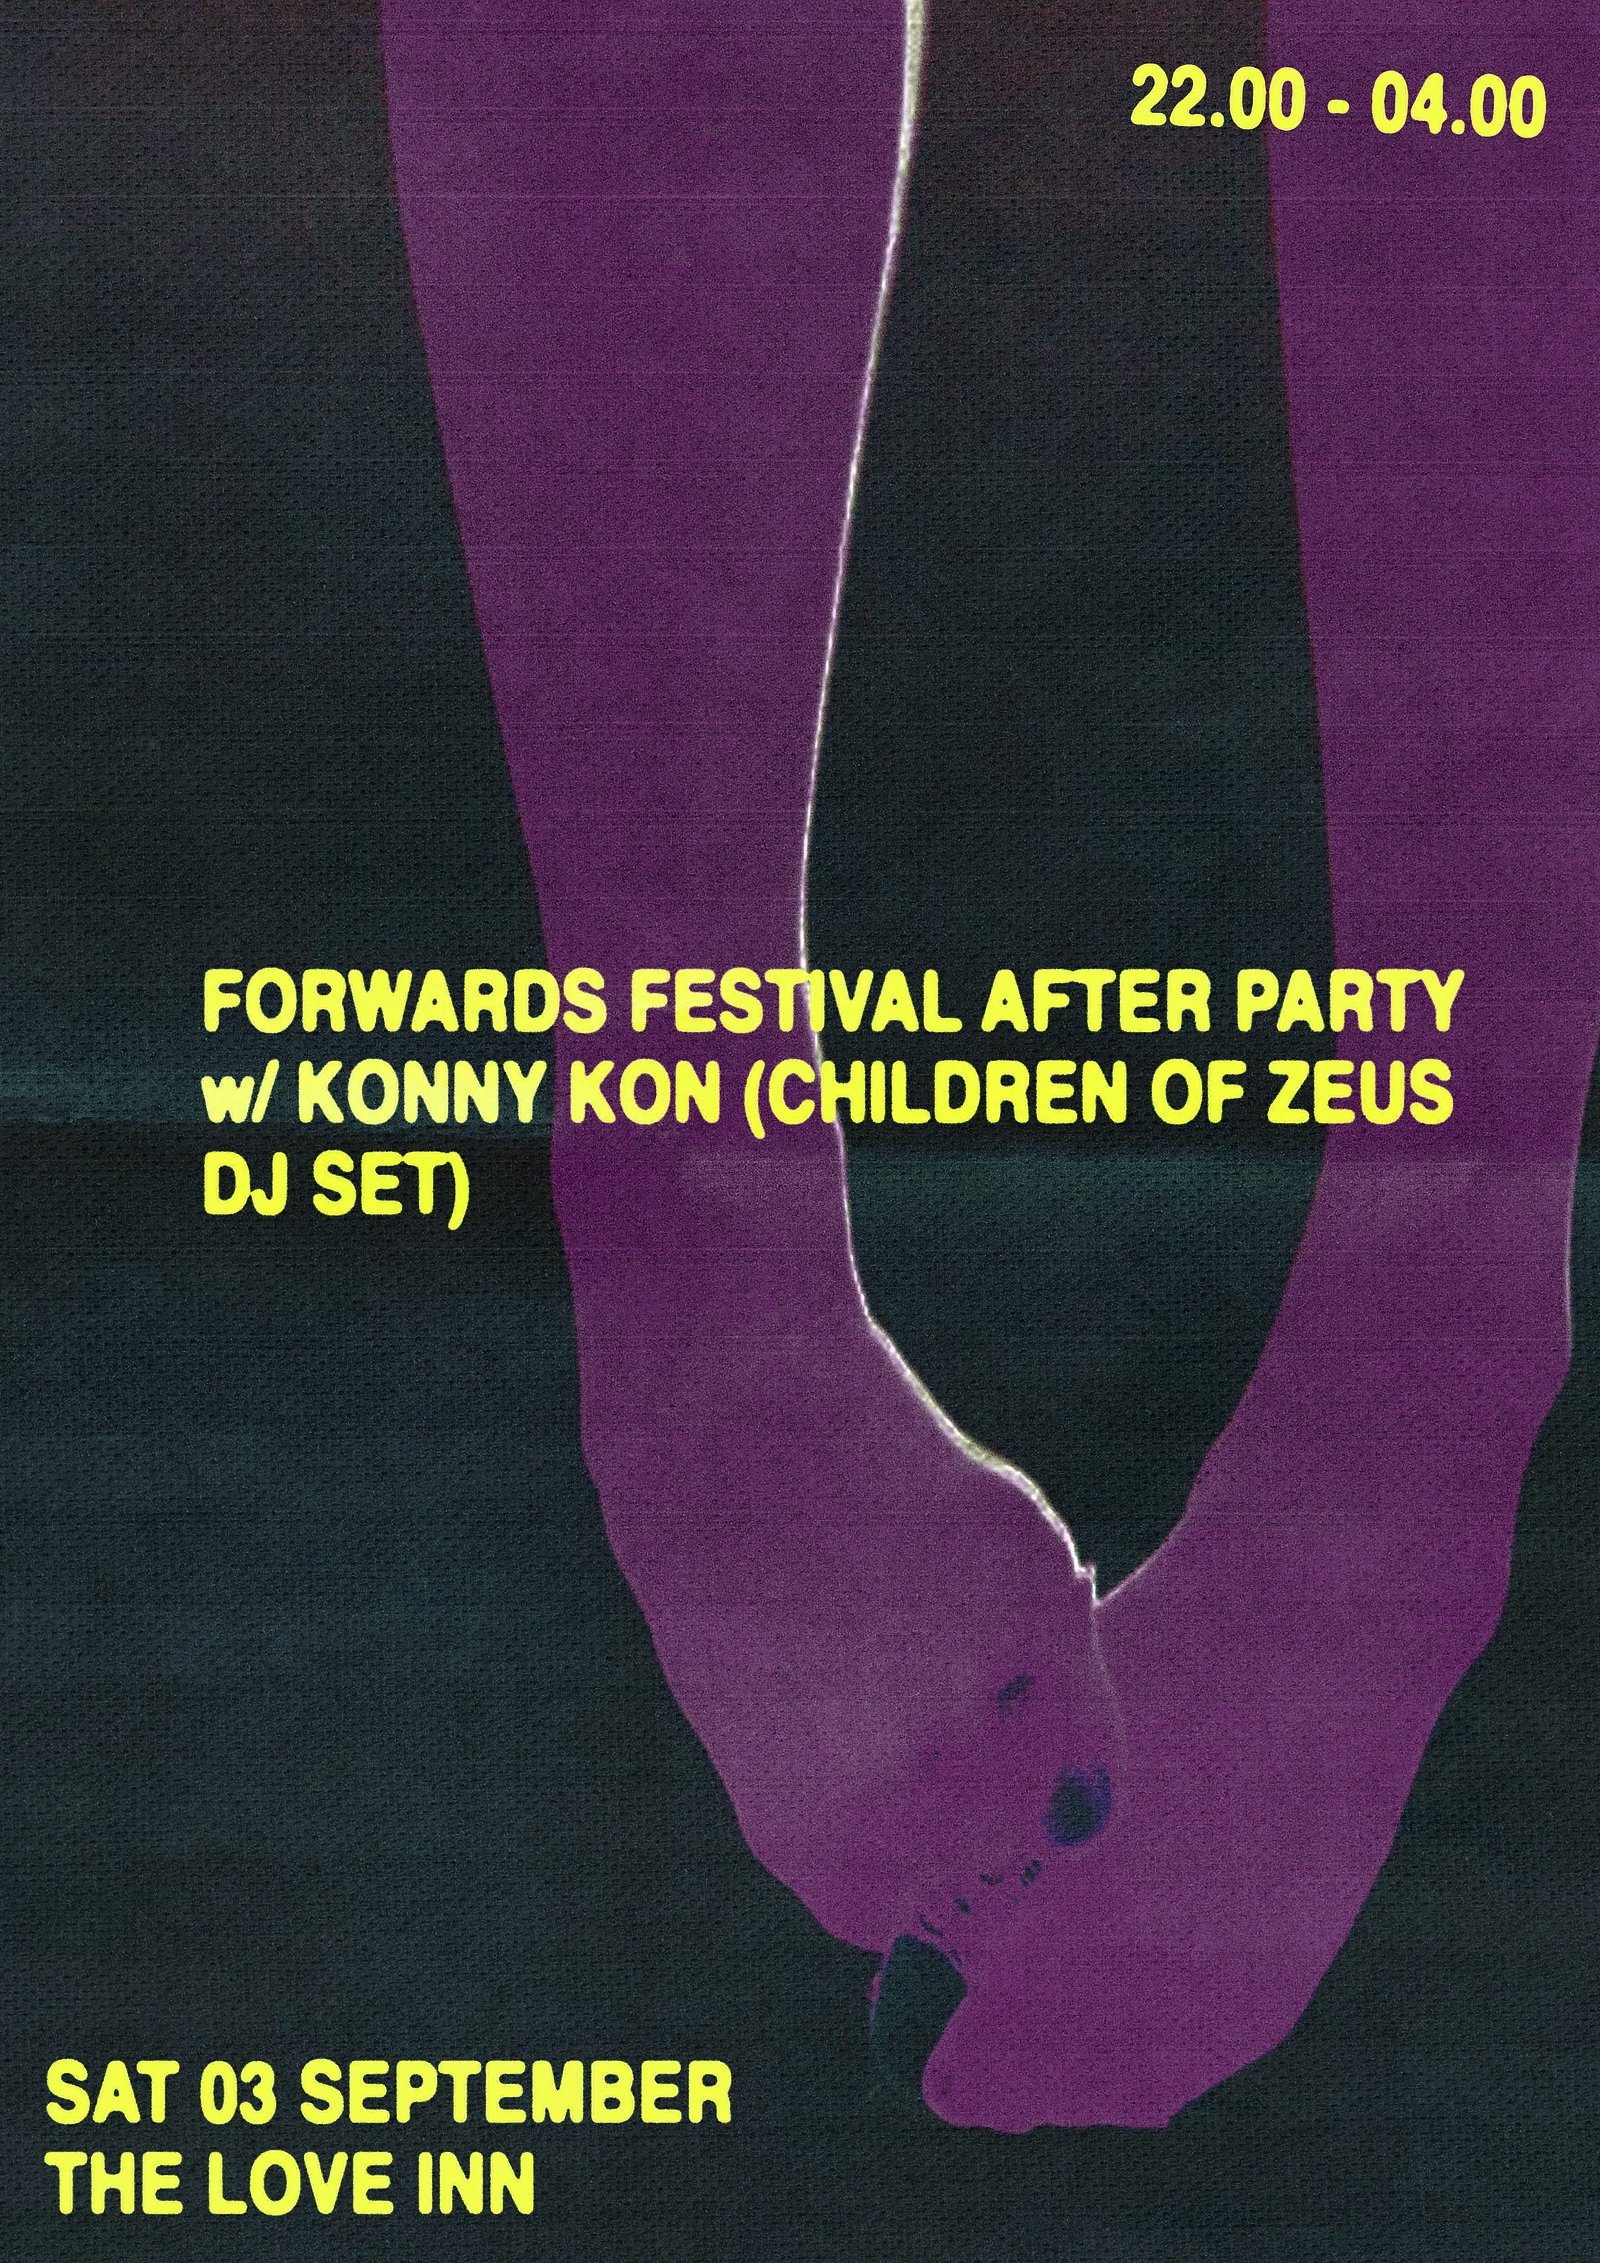 Forwards After Party w/ Konny Kon at The Love Inn